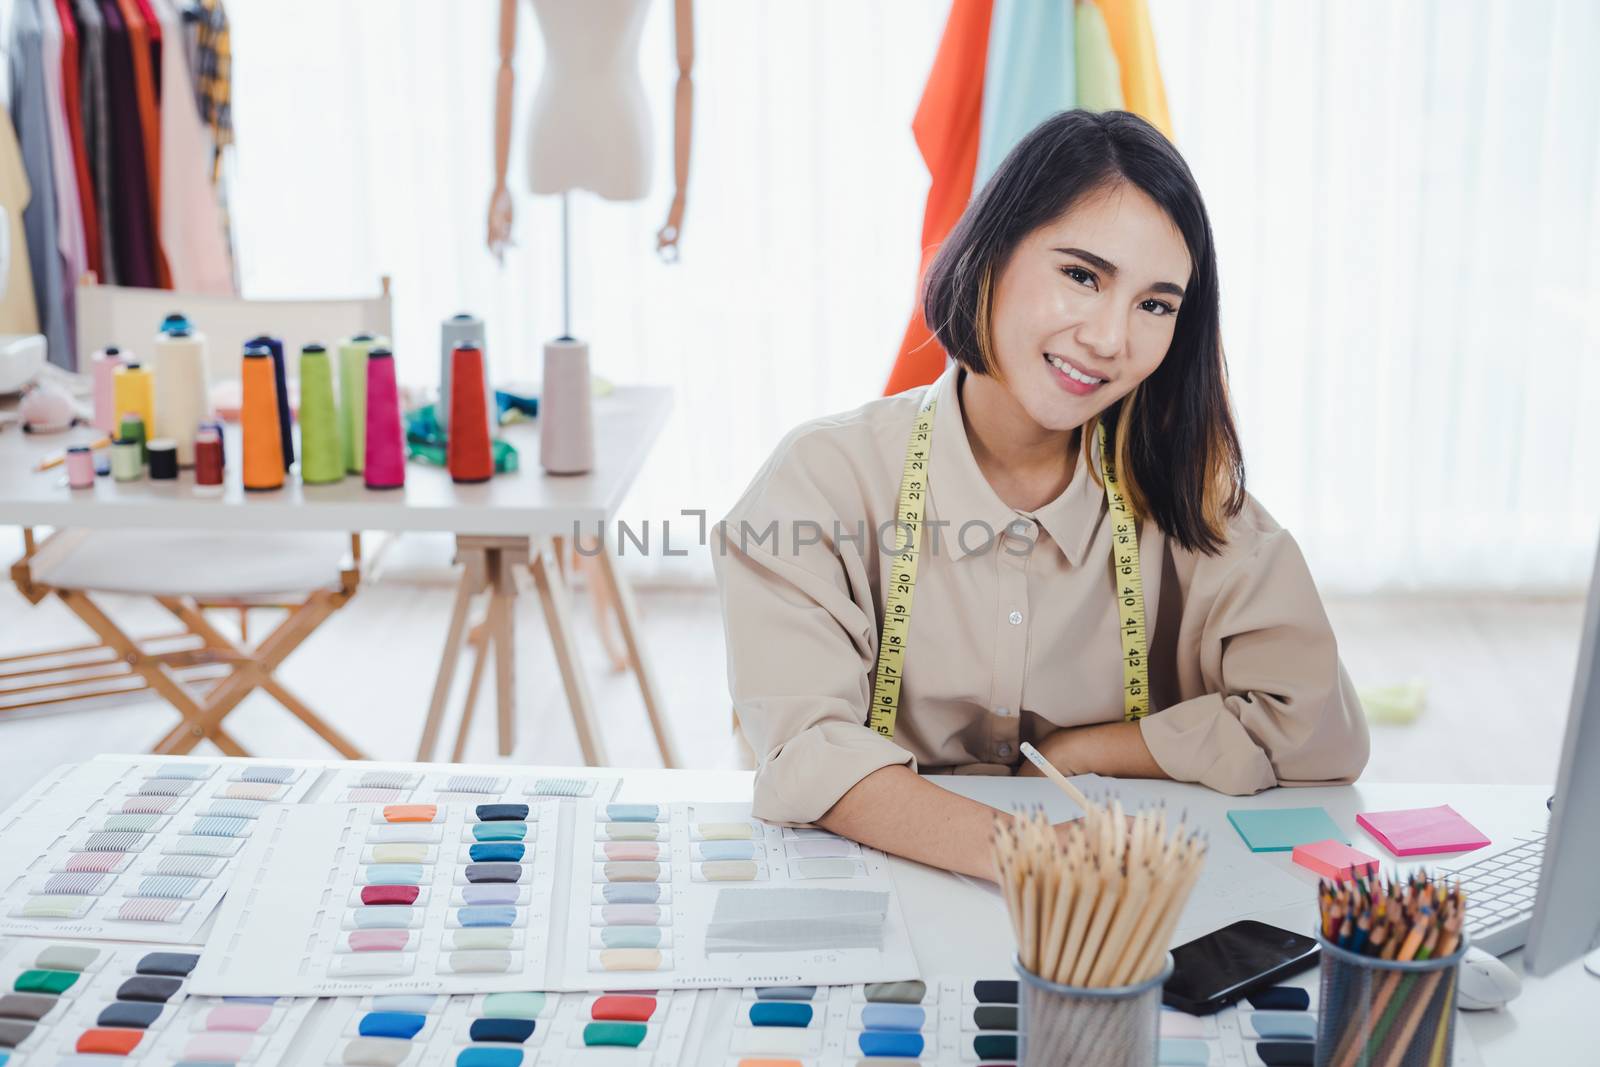 Asian woman designer are thinking and designing clothes for customers order items at the designer desk in the studio. Clothes designers are working in the office. Startup designer concept.